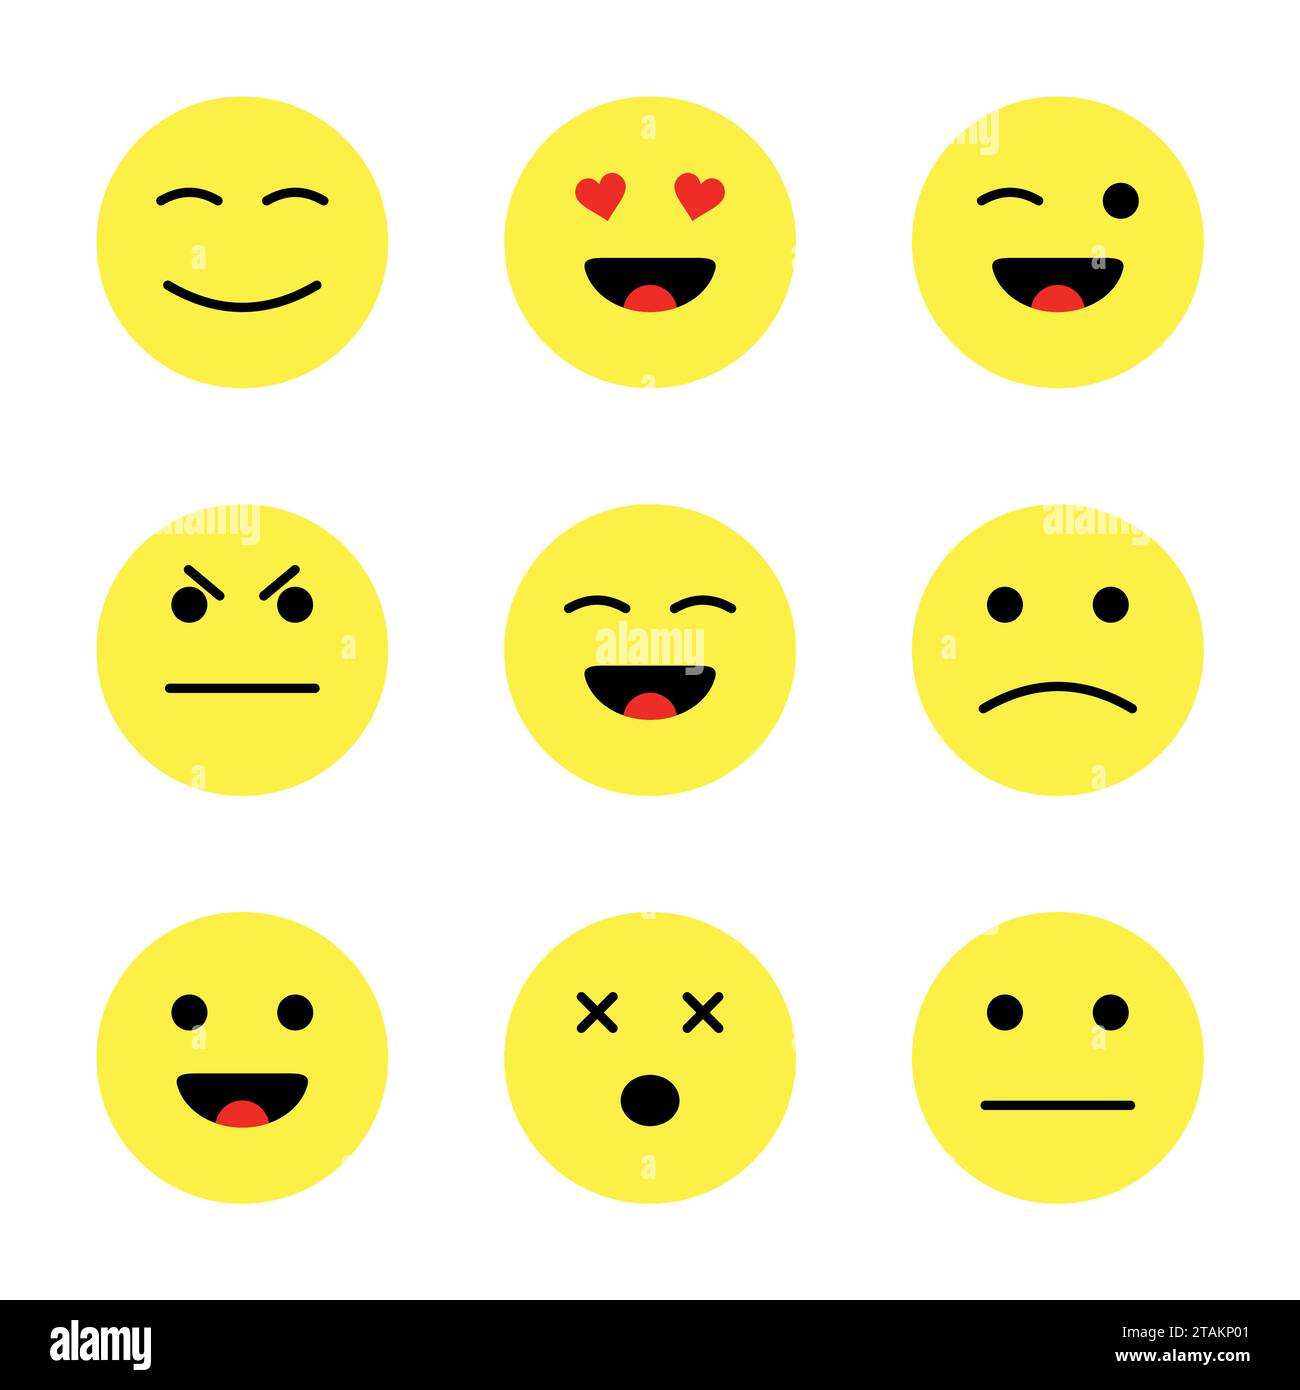 Set of cute smiley emoticons. Cartoon flat style faces smiles isolated ...